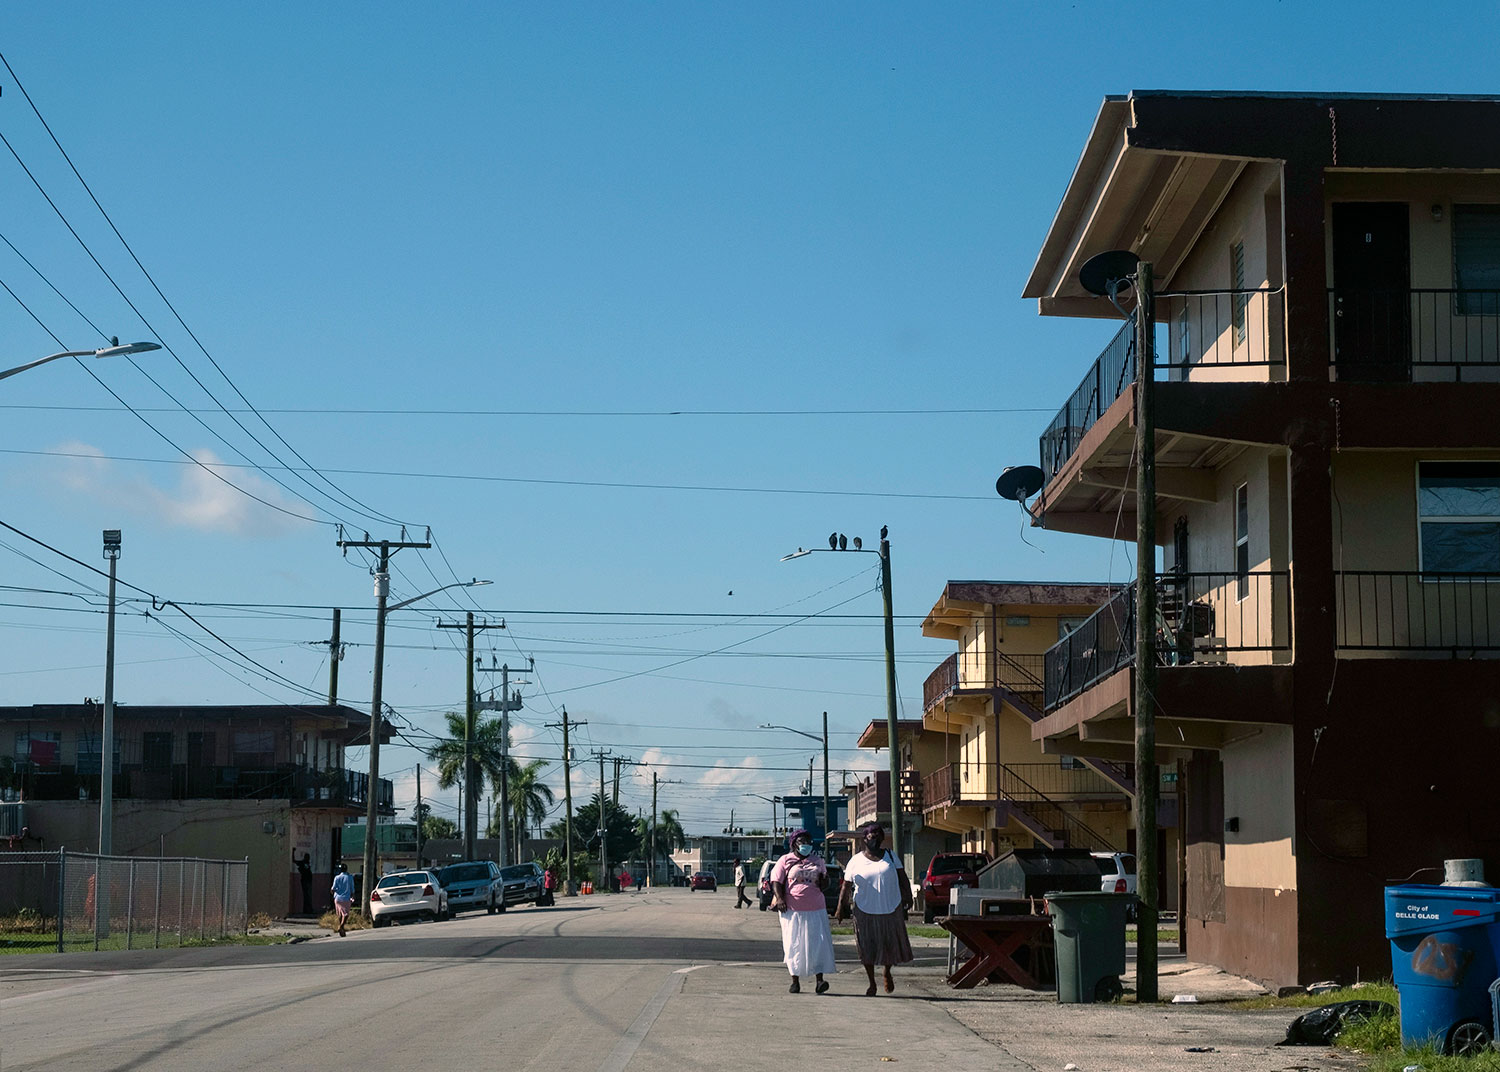 Belle Glade residents wearing masks walk down a street off of Martin Luther King, Jr. Boulevard, as COVID infection rates in Florida reach record highs (left).